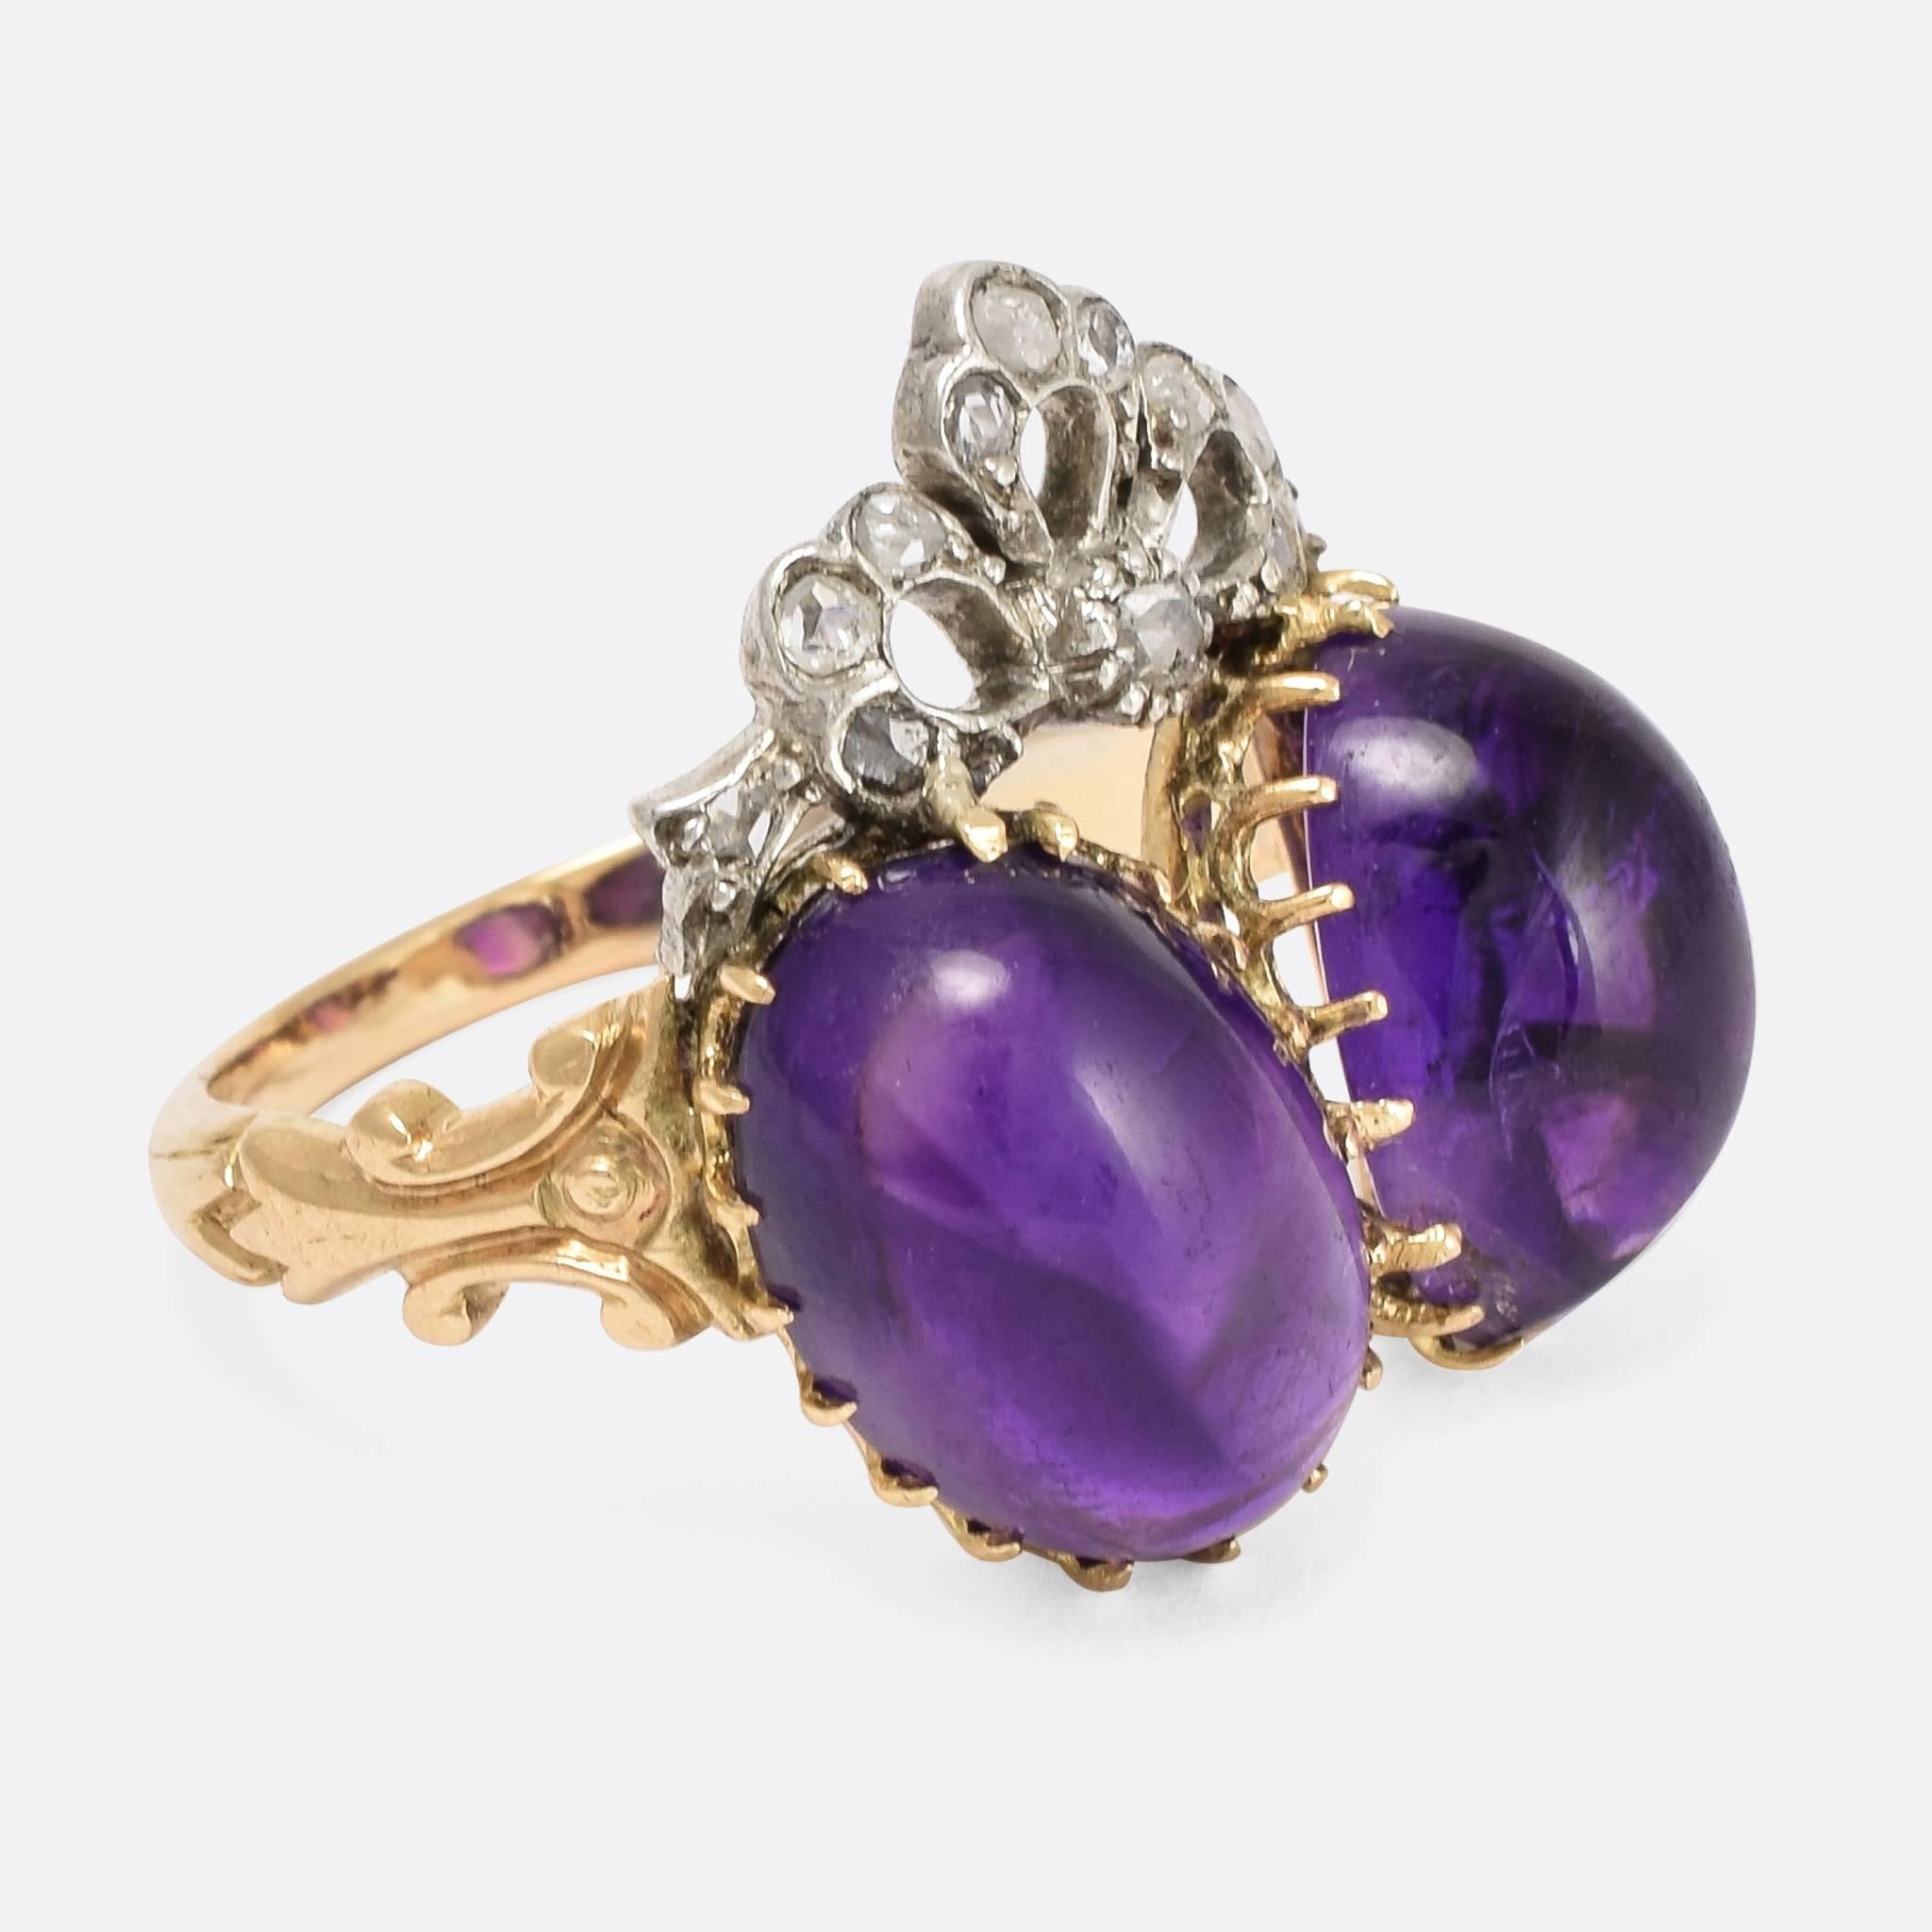 This magical ring is set with two oval-shaped amethyst cabochon stones, topped with a rose cut diamond set bow. The shoulder are beautifully detailed, with little scrolls, and the band is modelled in 15ct gold. A wonderfully romantic ring that is a